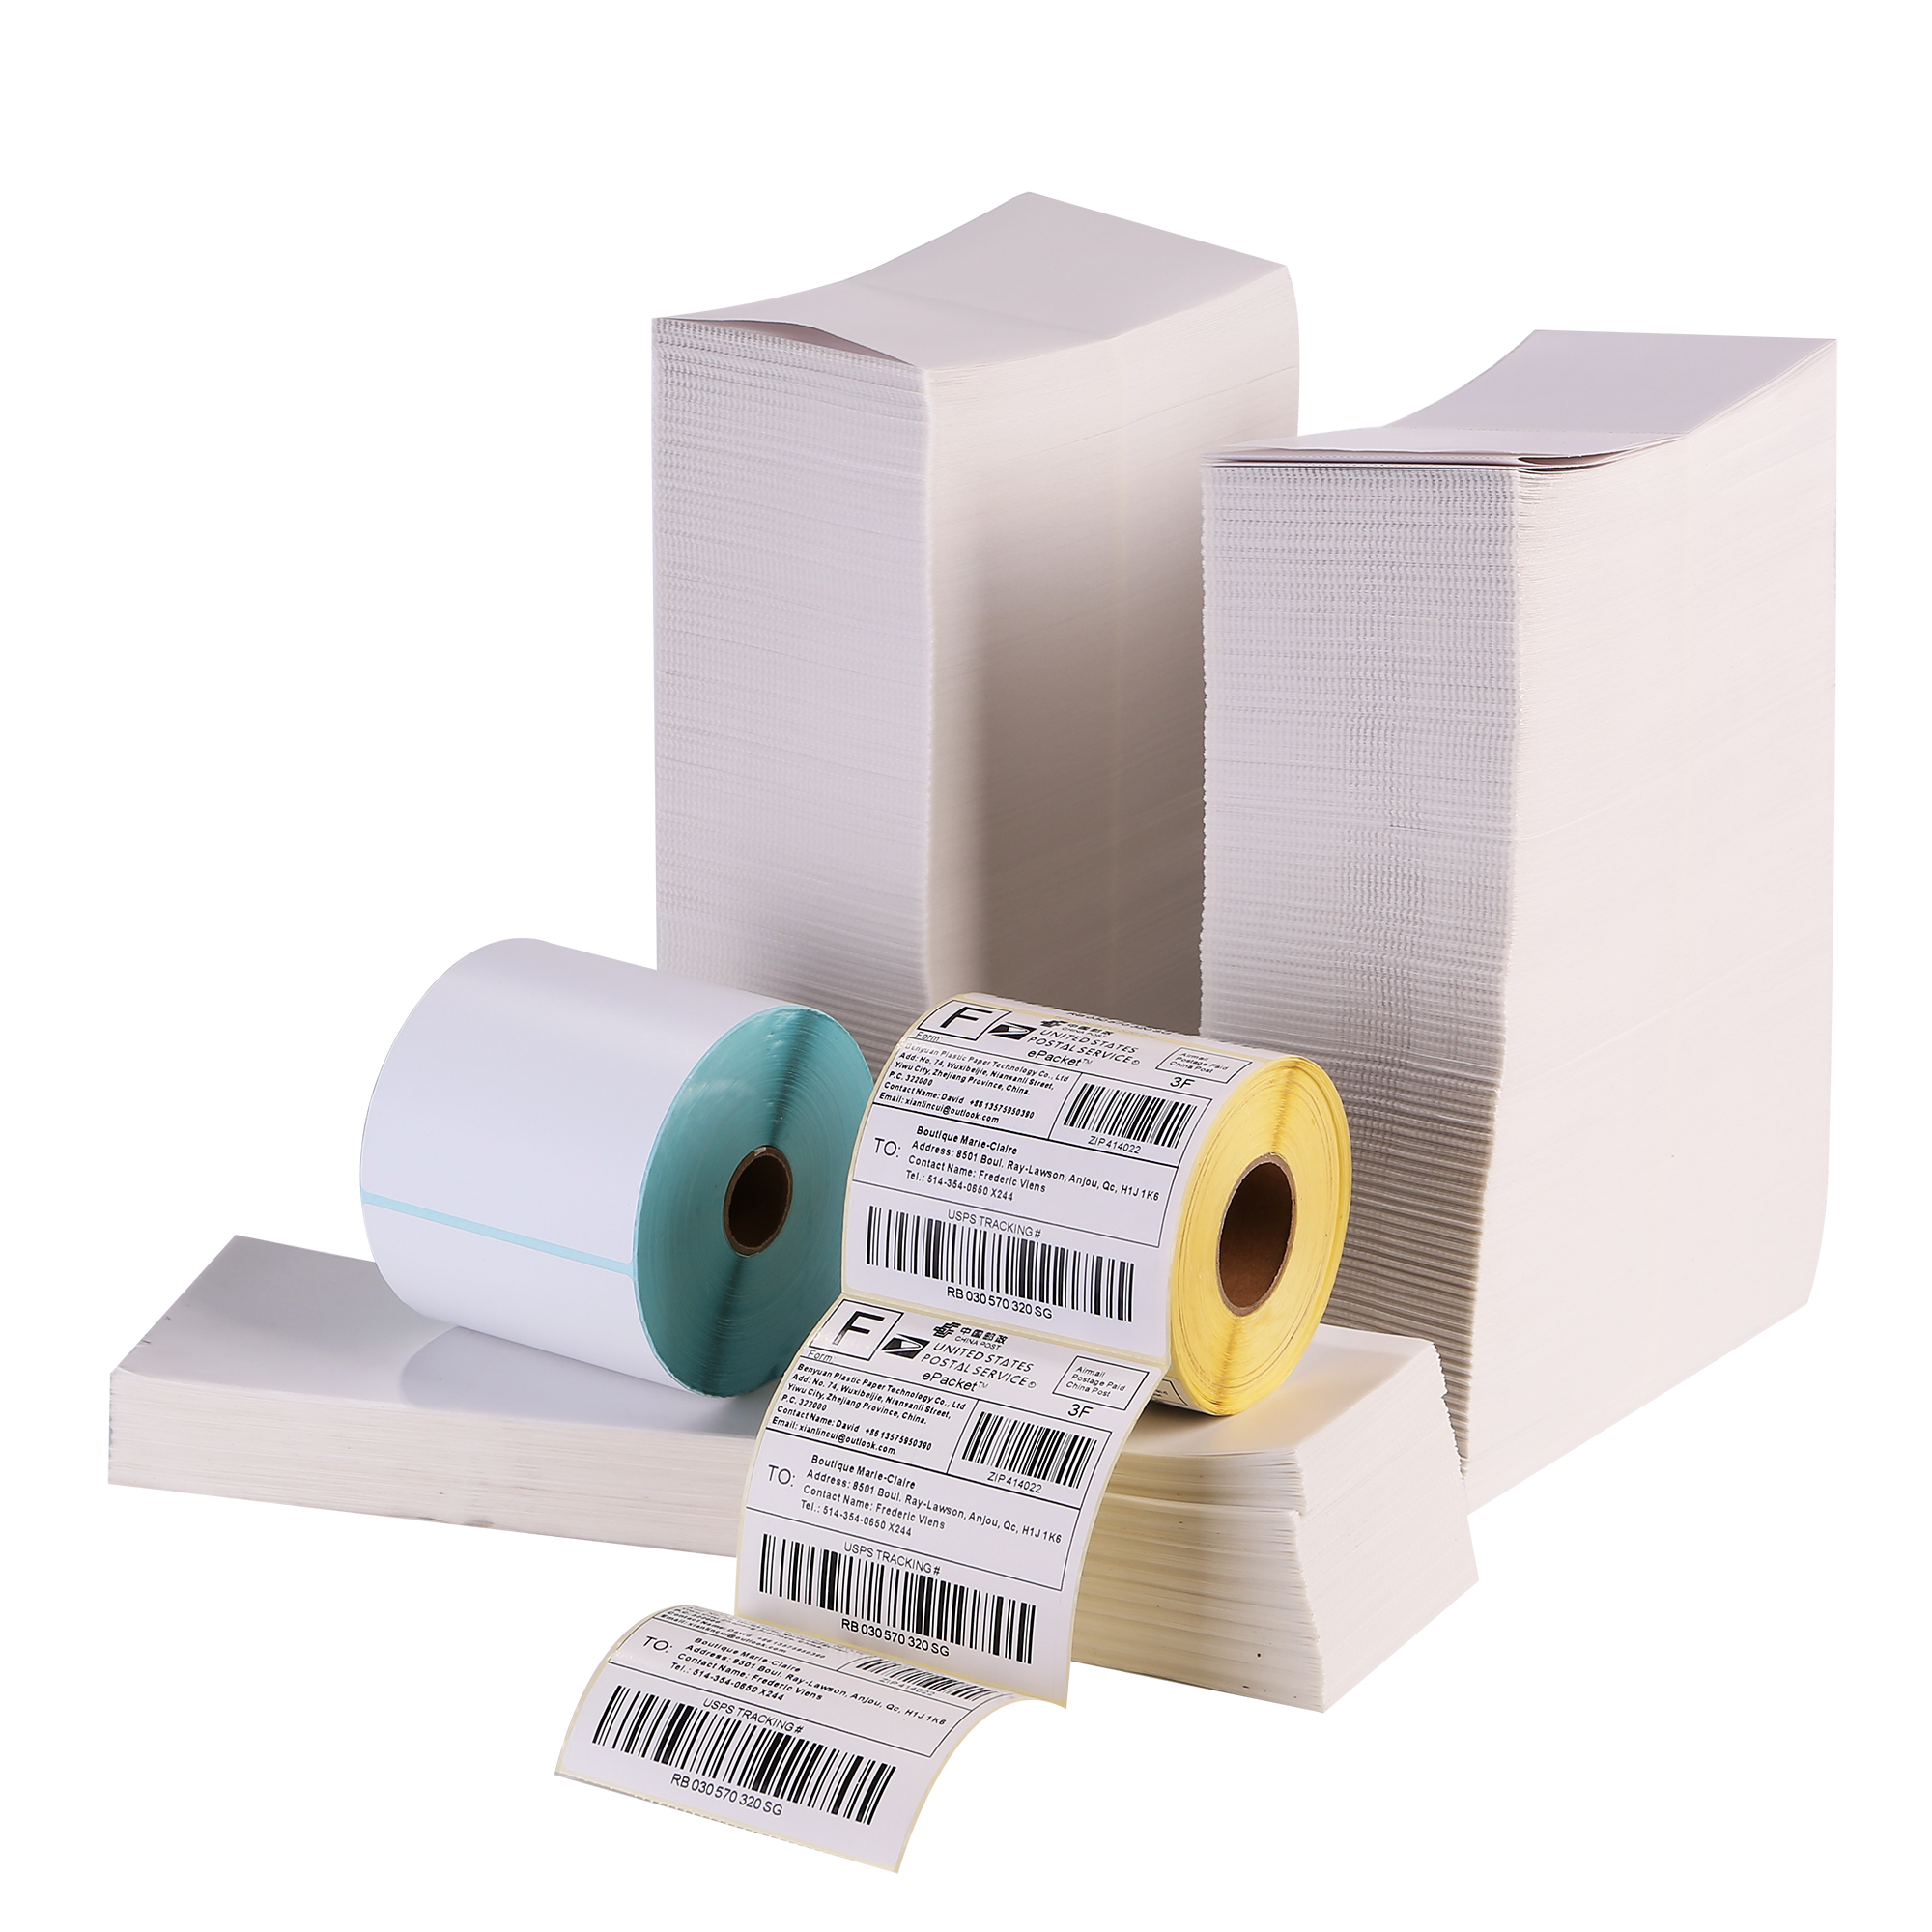 High quality a6 4"x6" white blank shipping thermal label